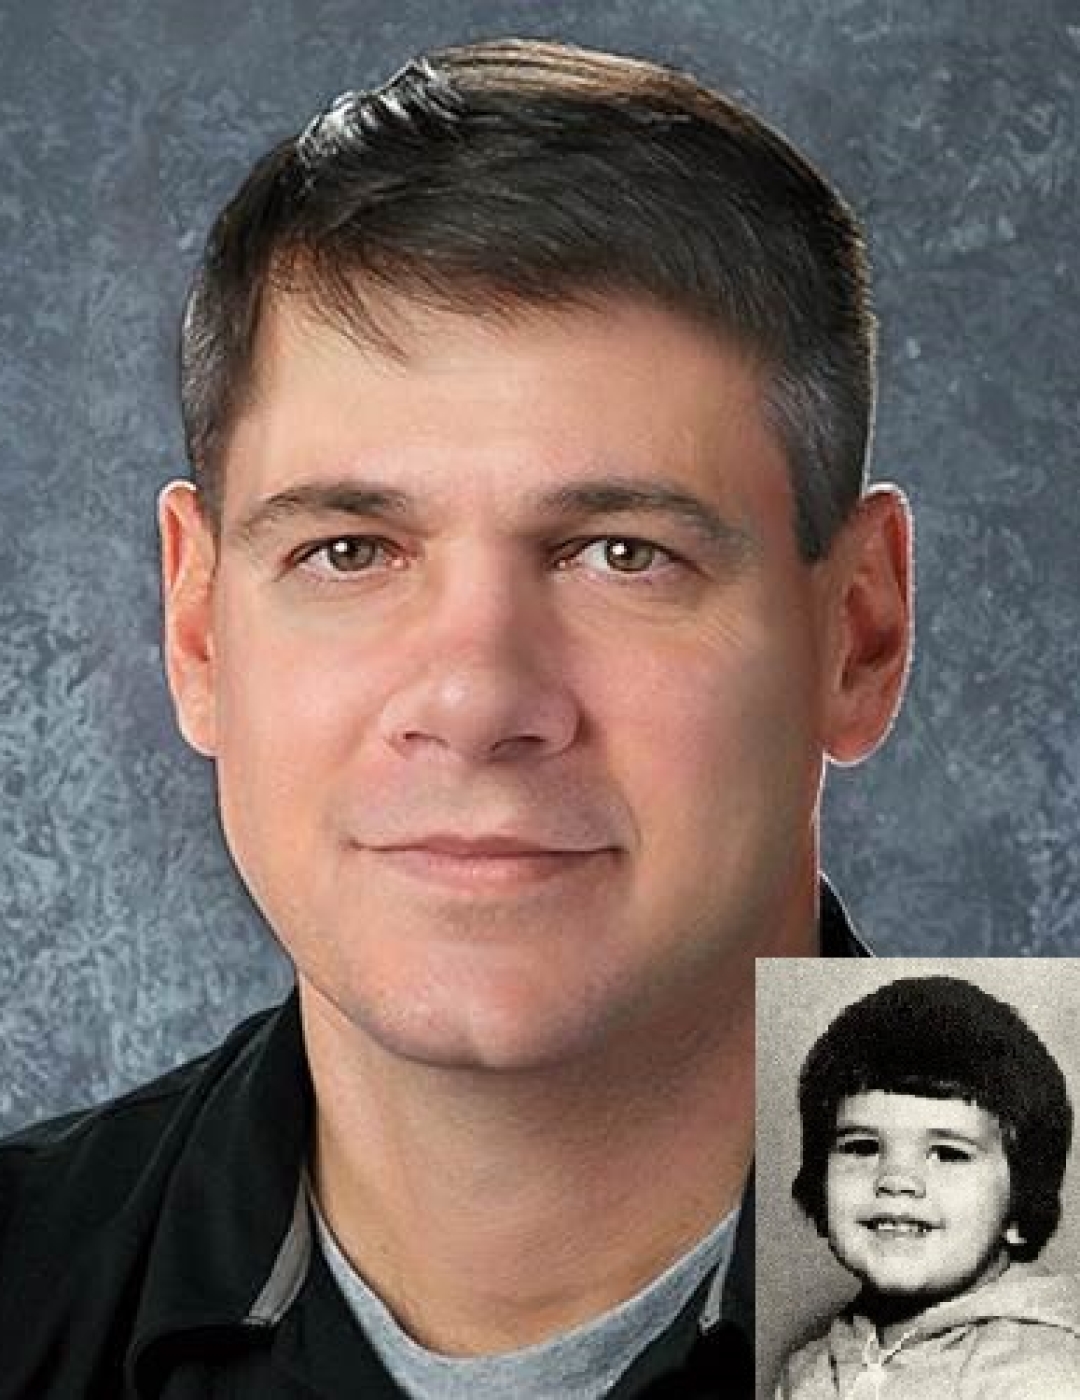 Richard Barnett. Missing child with brown hair and hazel eyes. Age progressed photo shows what Richard looks like at 40 years old: adult man with short gray-brown hair and hazel eyes.